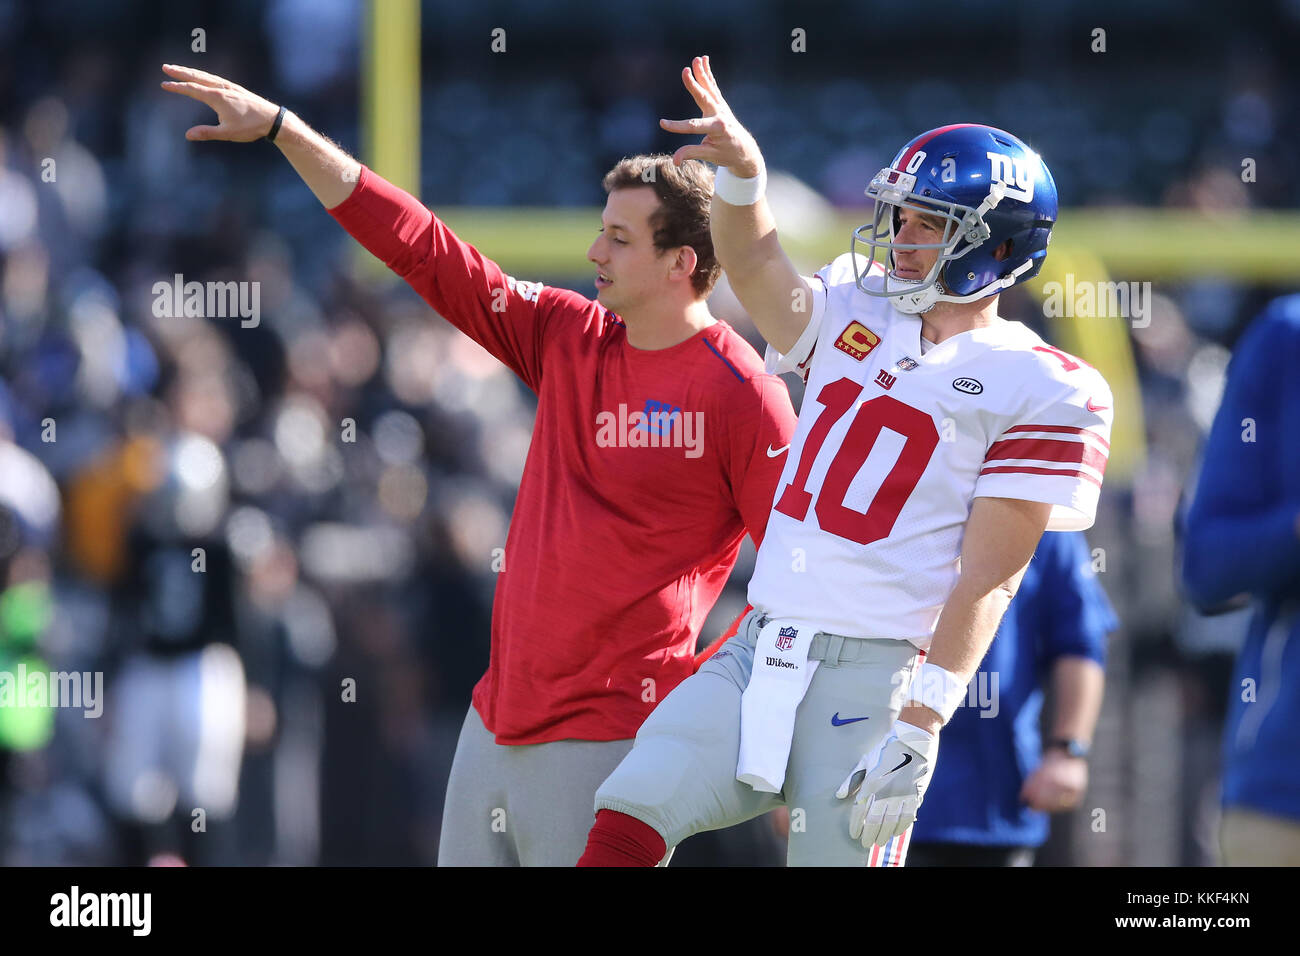 Oakland, USA. December 3, 2017: New York Giants quarterback Eli Manning (10) and New York Giants quarterback Davis Webb (5) do a wave together after a pre-game chat in the game between the New York Giants and Oakland Raiders, Oakland Coliseum, Oakland, CA. Peter Joneleit Stock Photo